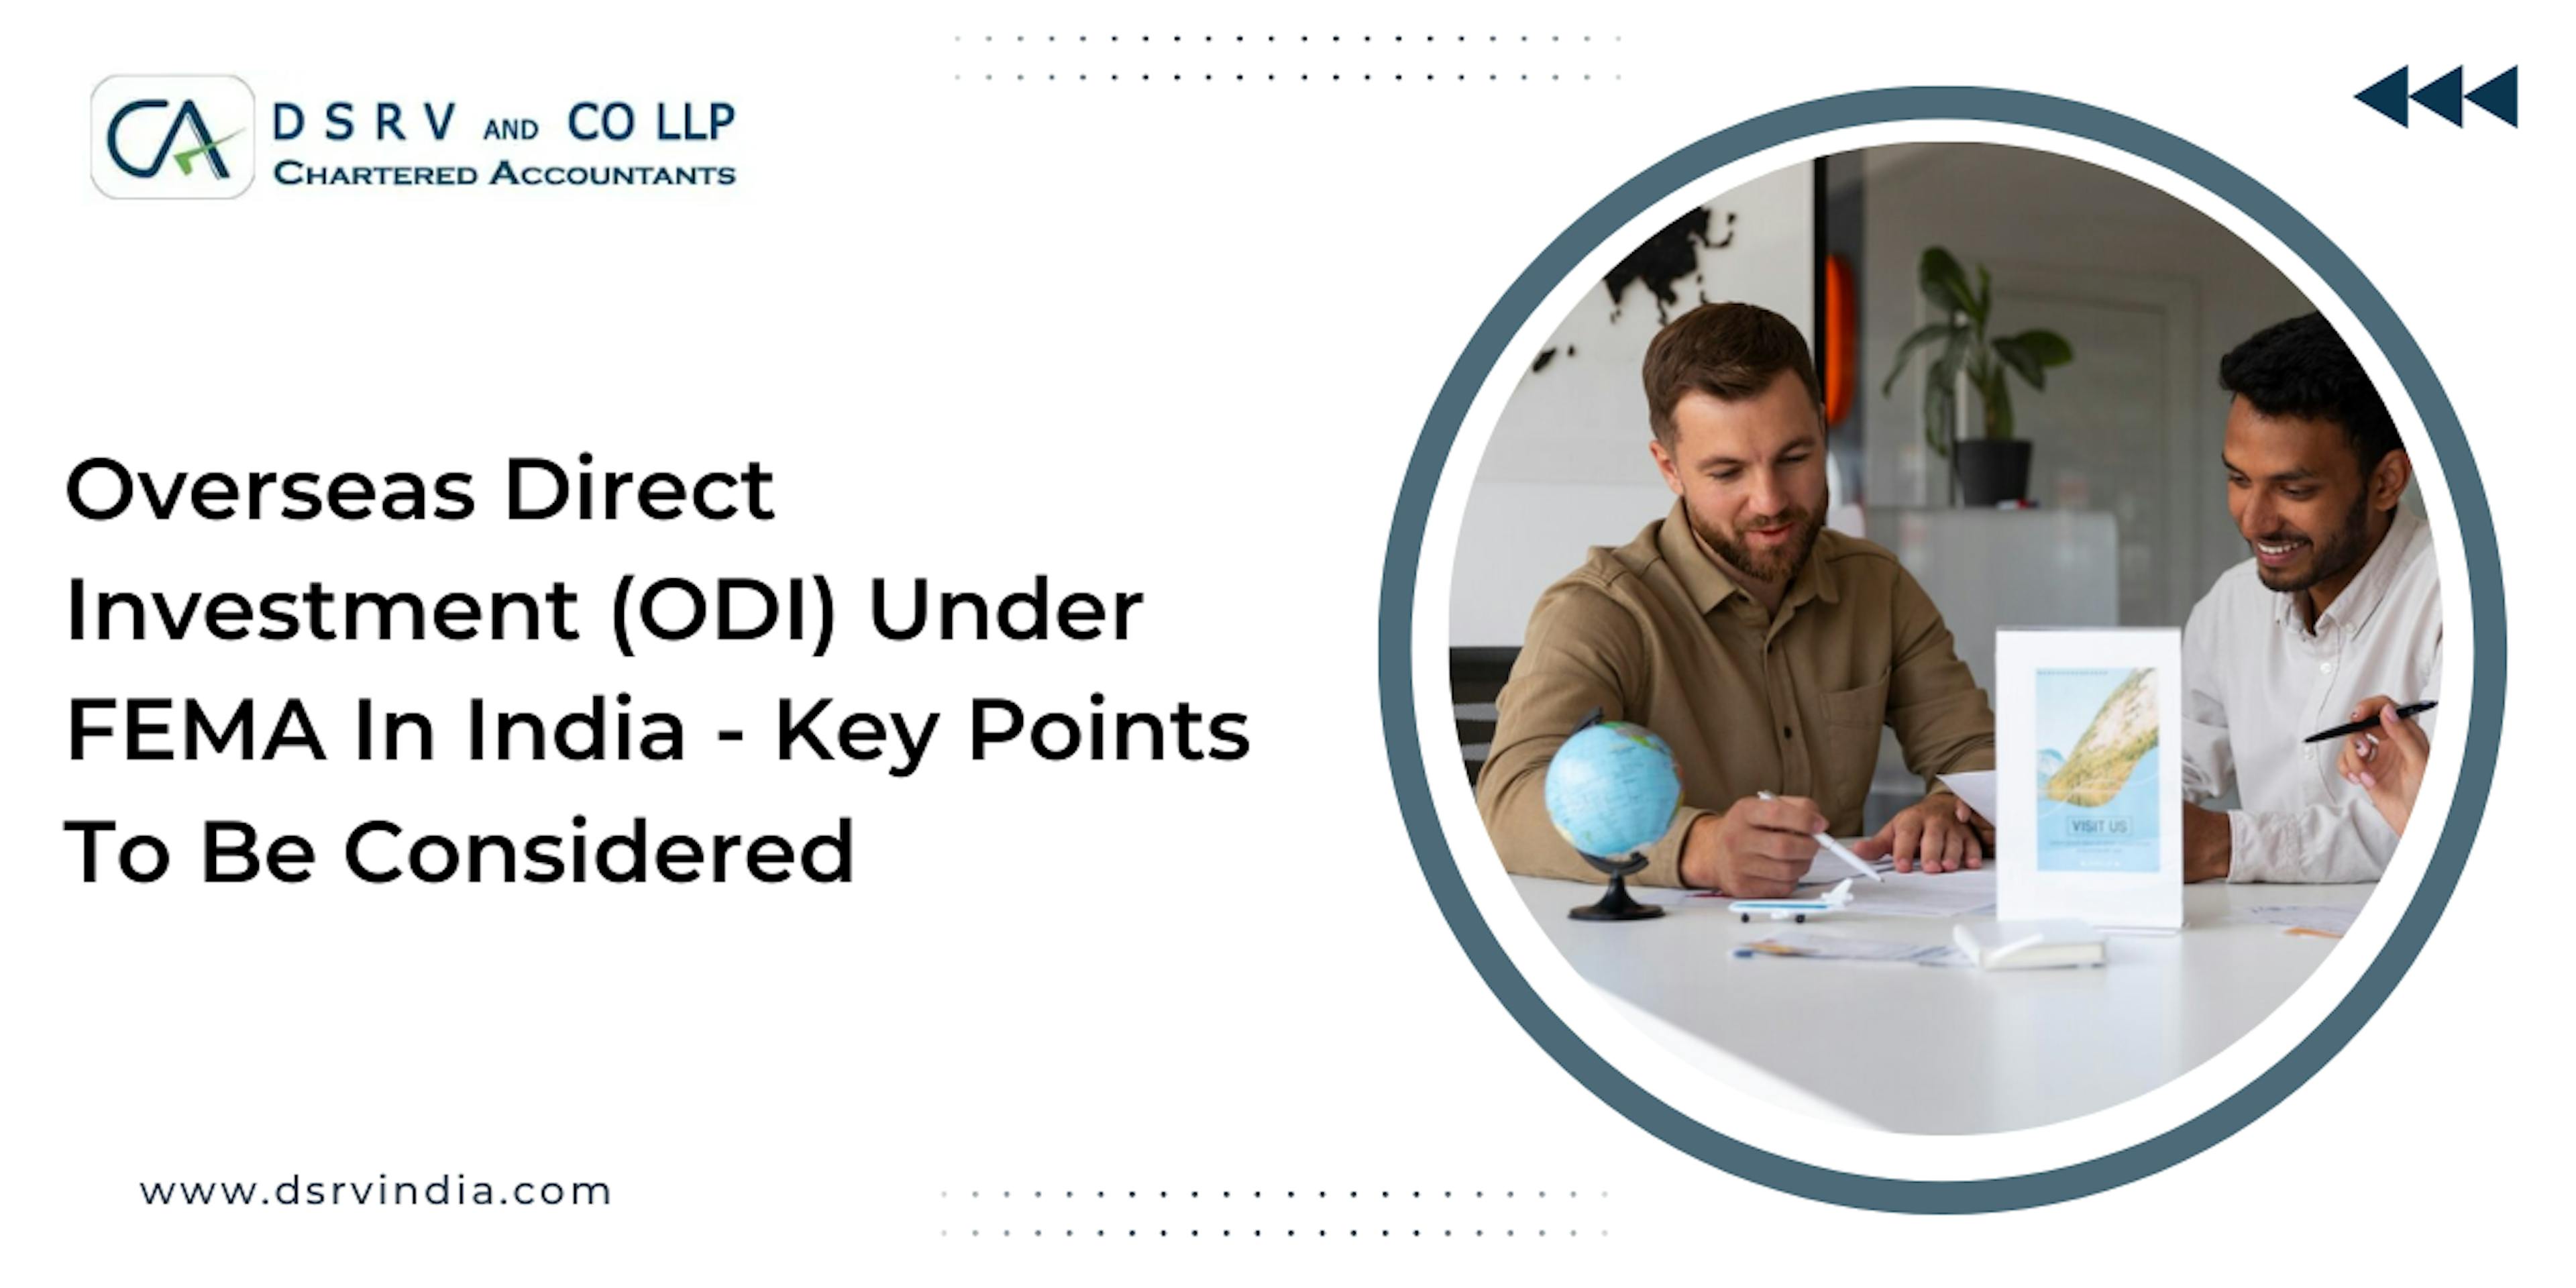 Overseas Direct Investment (ODI) Under FEMA In India - Key Points To Be Considered  - Blog Poster